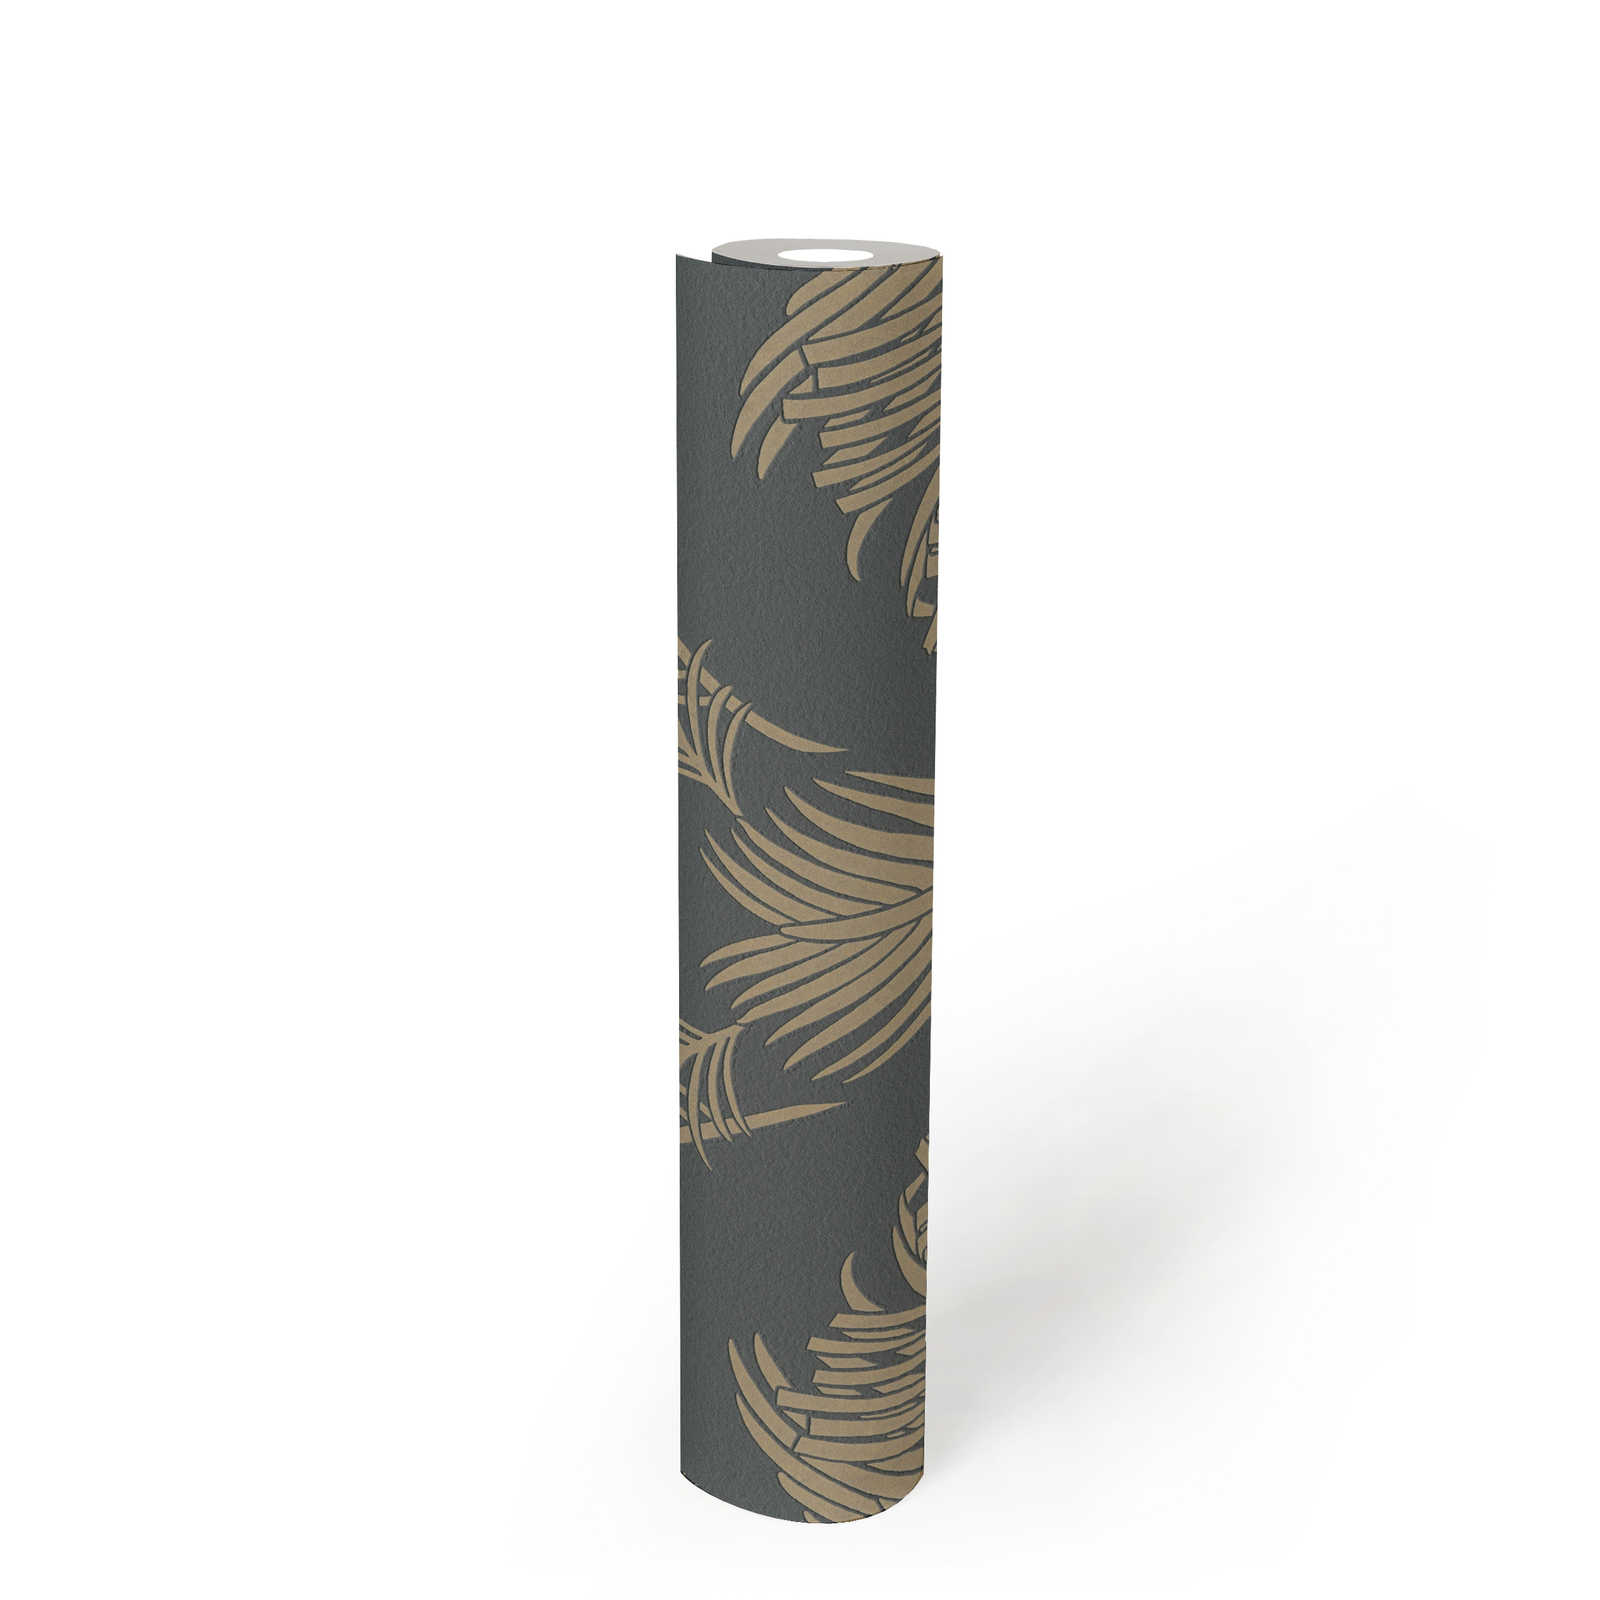             Palm leaves wallpaper grey & gold with texture & metallic effect
        